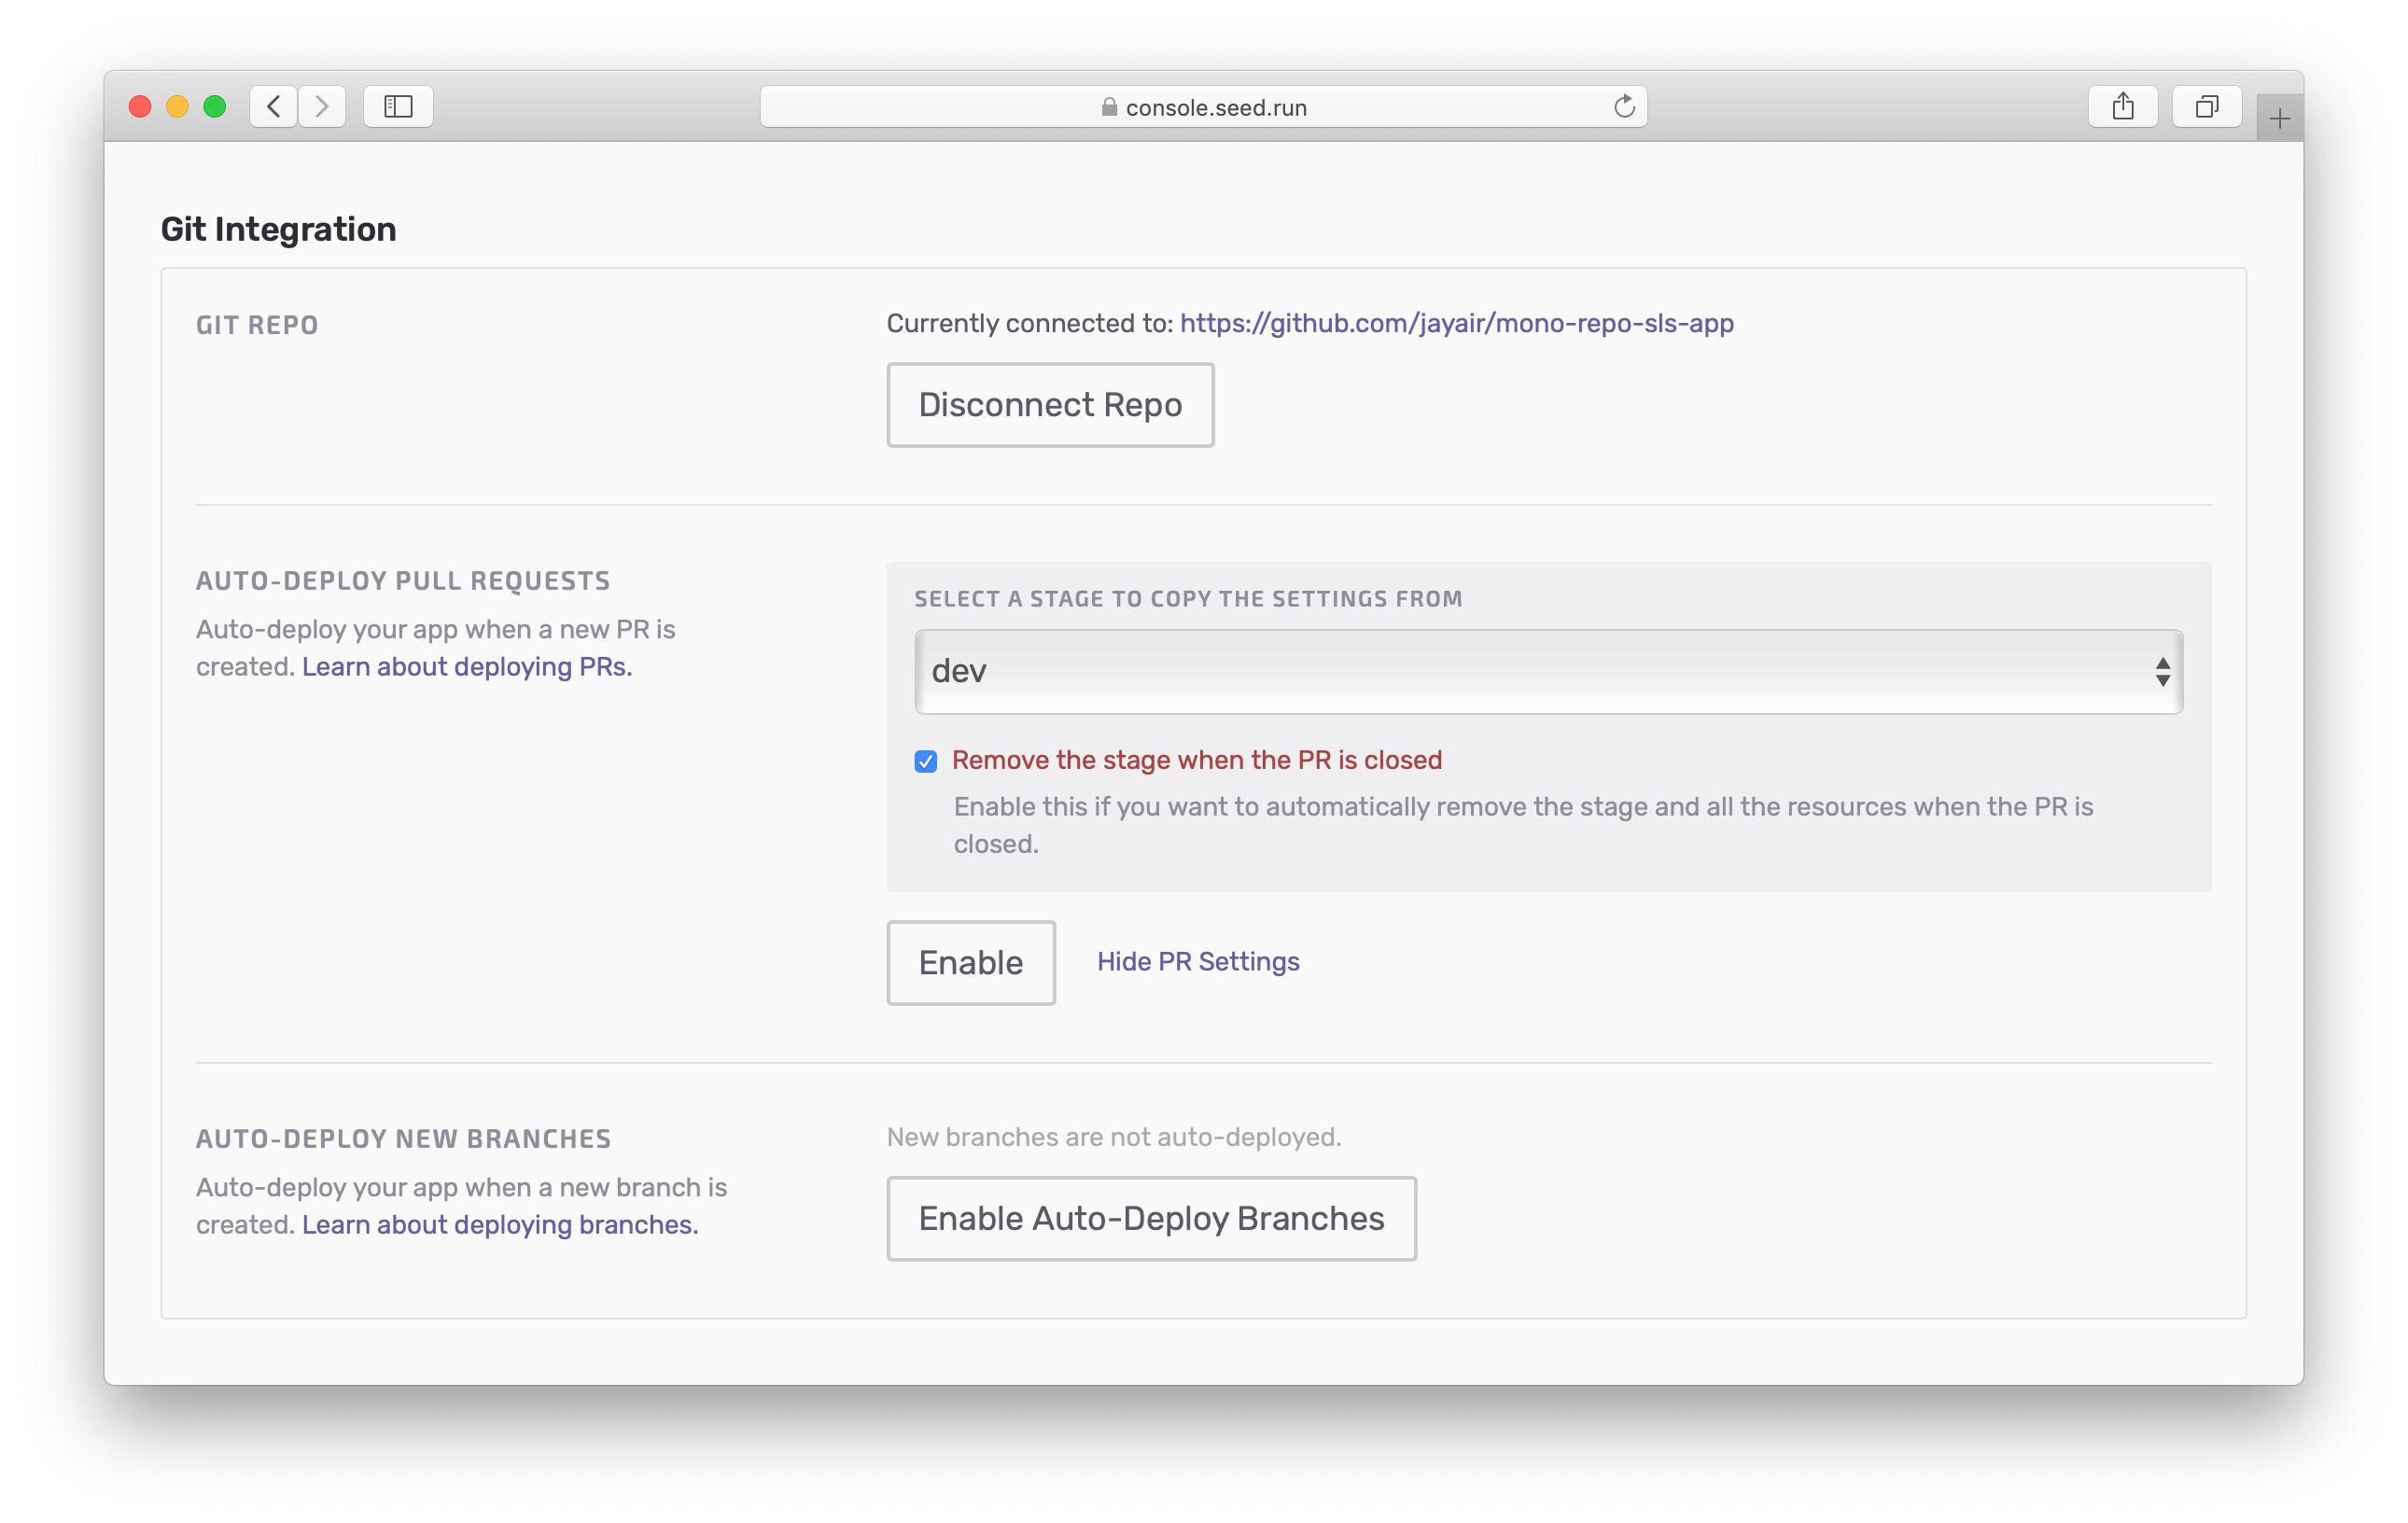 New auto-deploy pull request setting